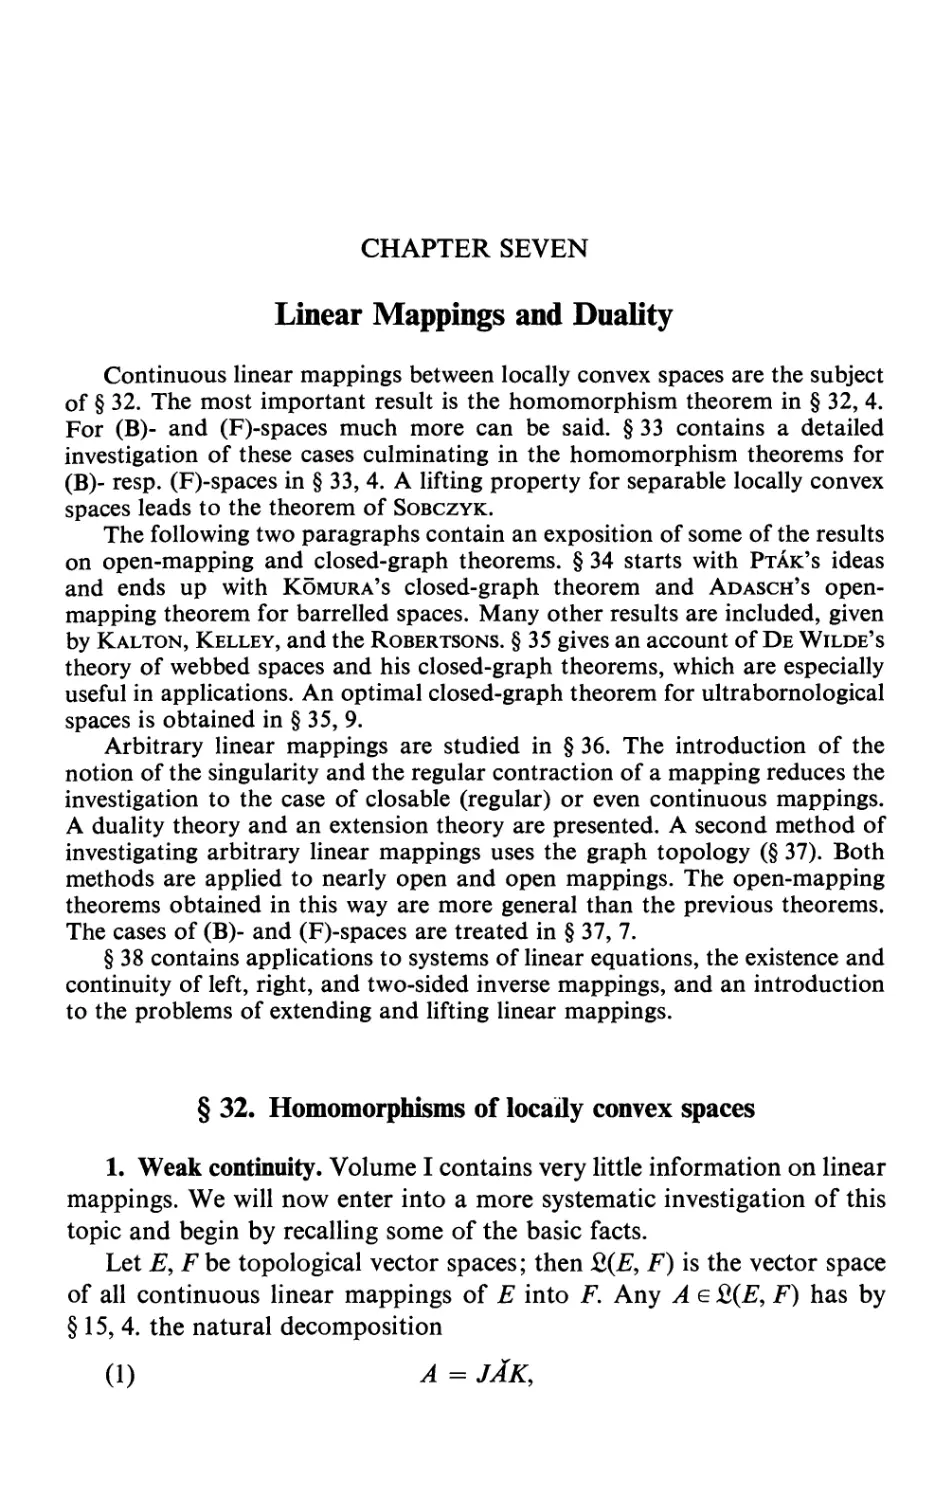 Chapter Seven - Linear Mappings and Duality